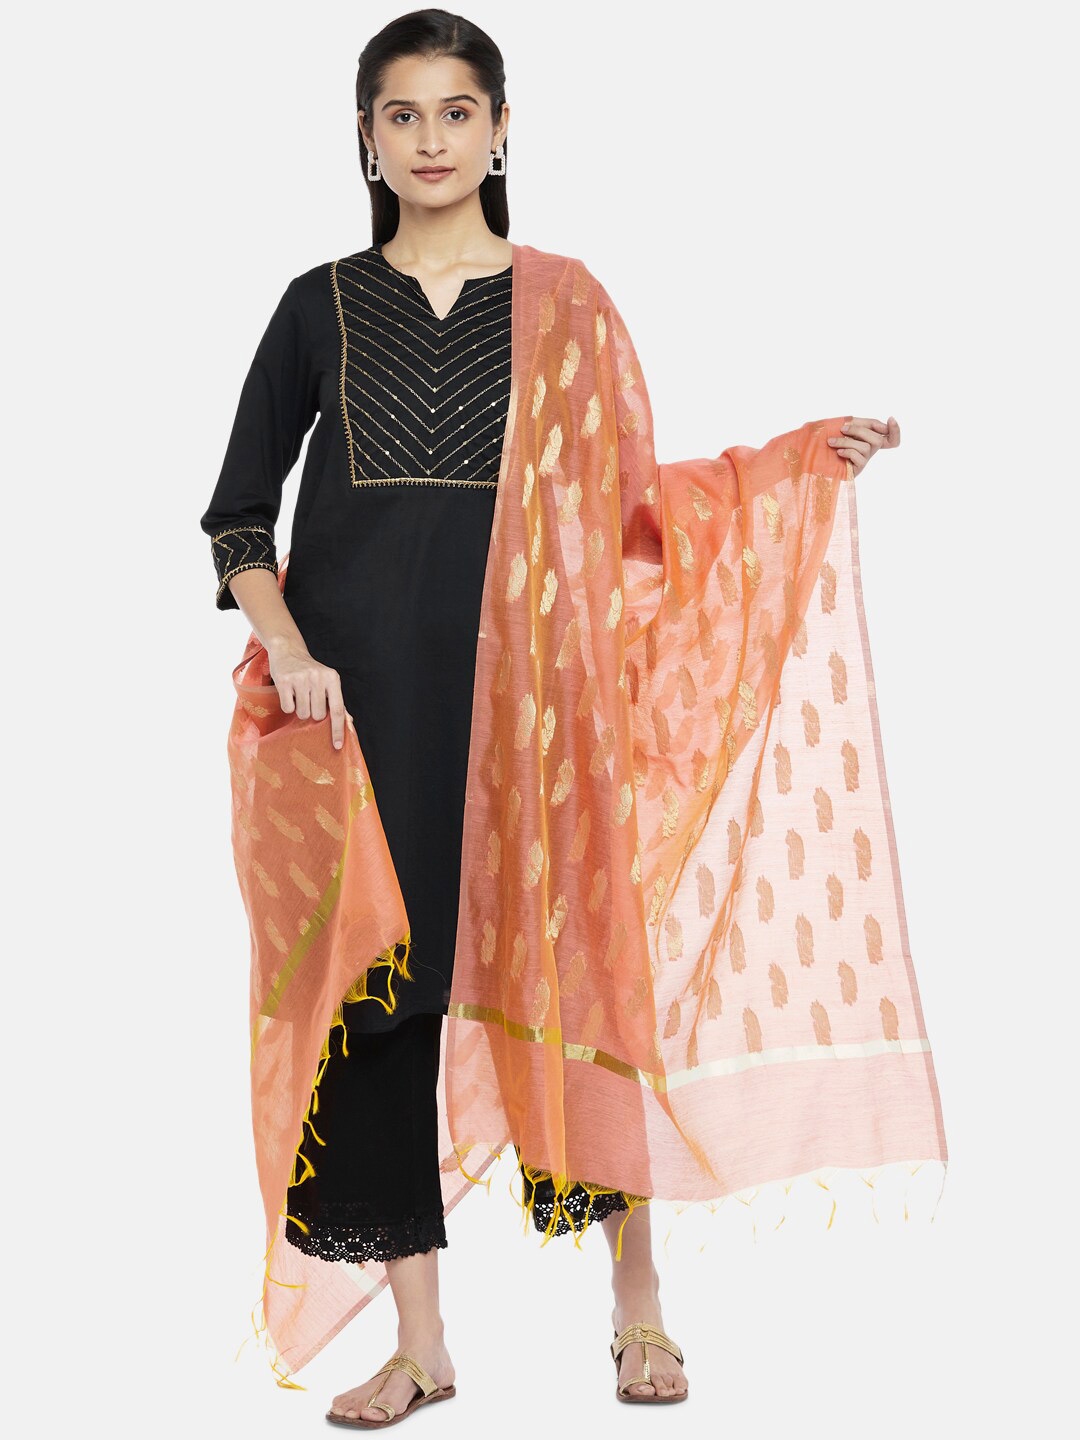 RANGMANCH BY PANTALOONS Gold-Toned Ethnic Motifs Woven Design Pure